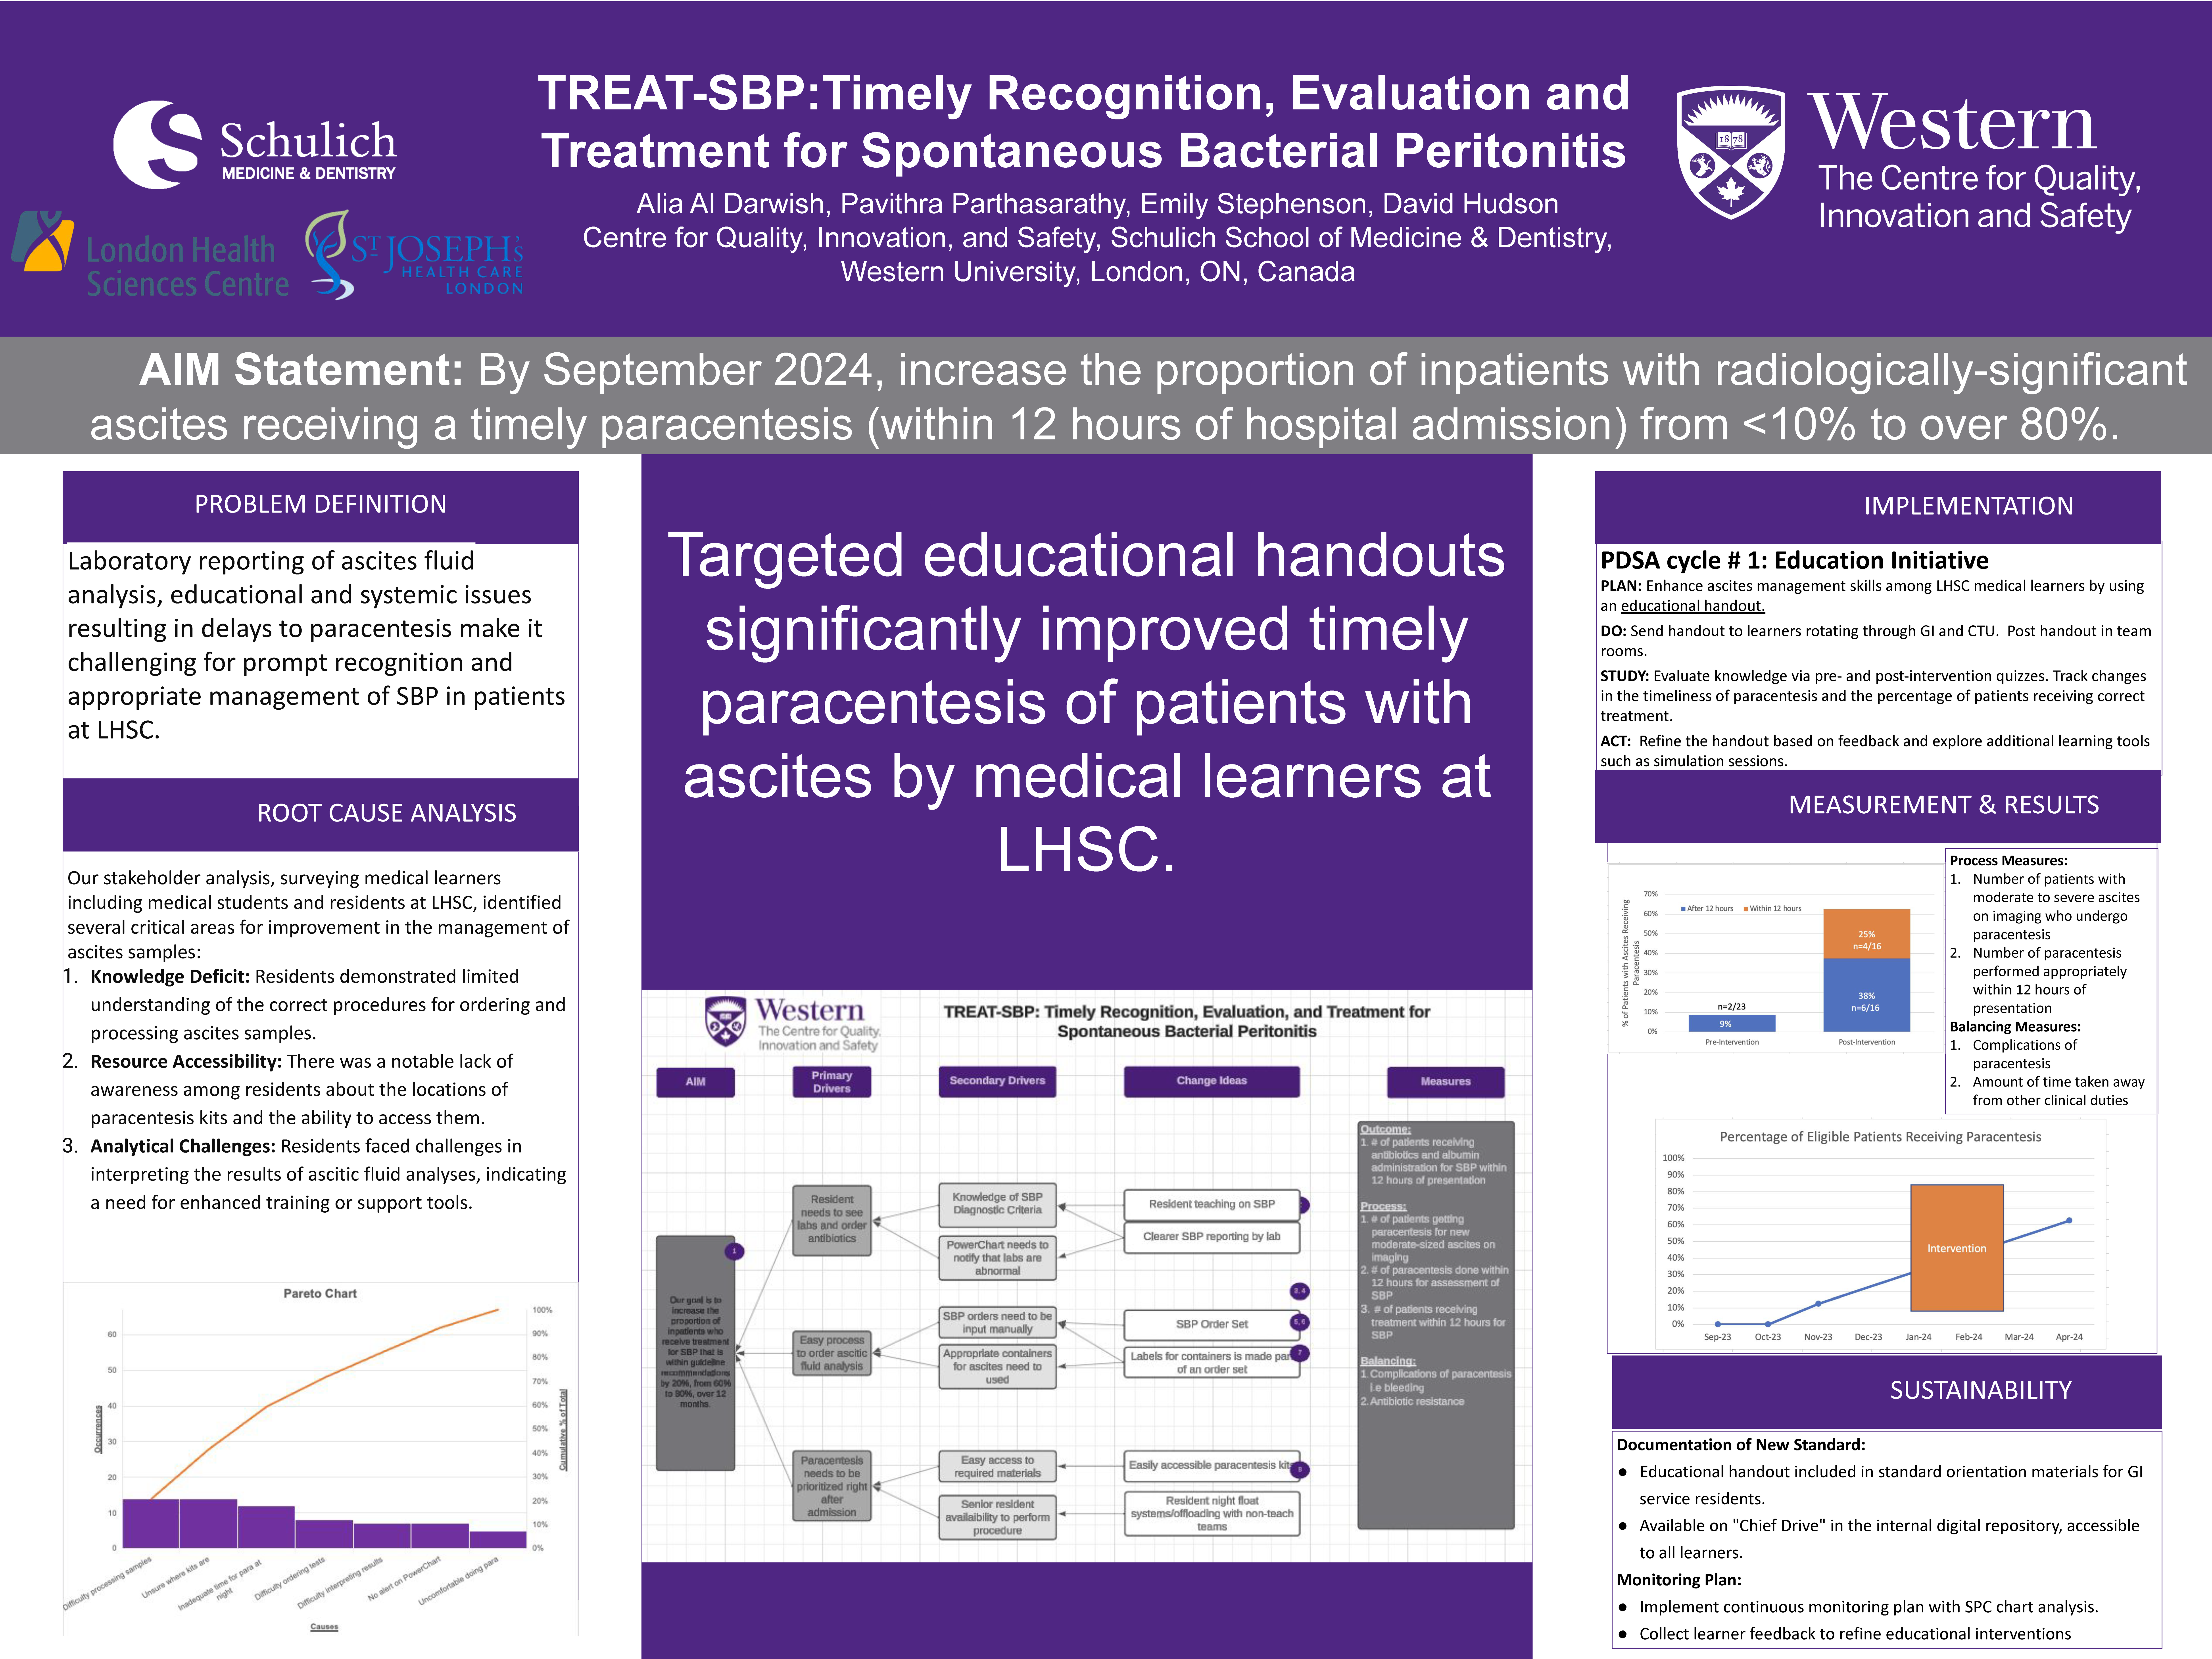 BISQ_2023-2024_TREAT-SBP:_Timely_Recognition,_Evaluation_and_Treatment_for_Spontaneous_Bacterial_Peritonitis_Poster.png